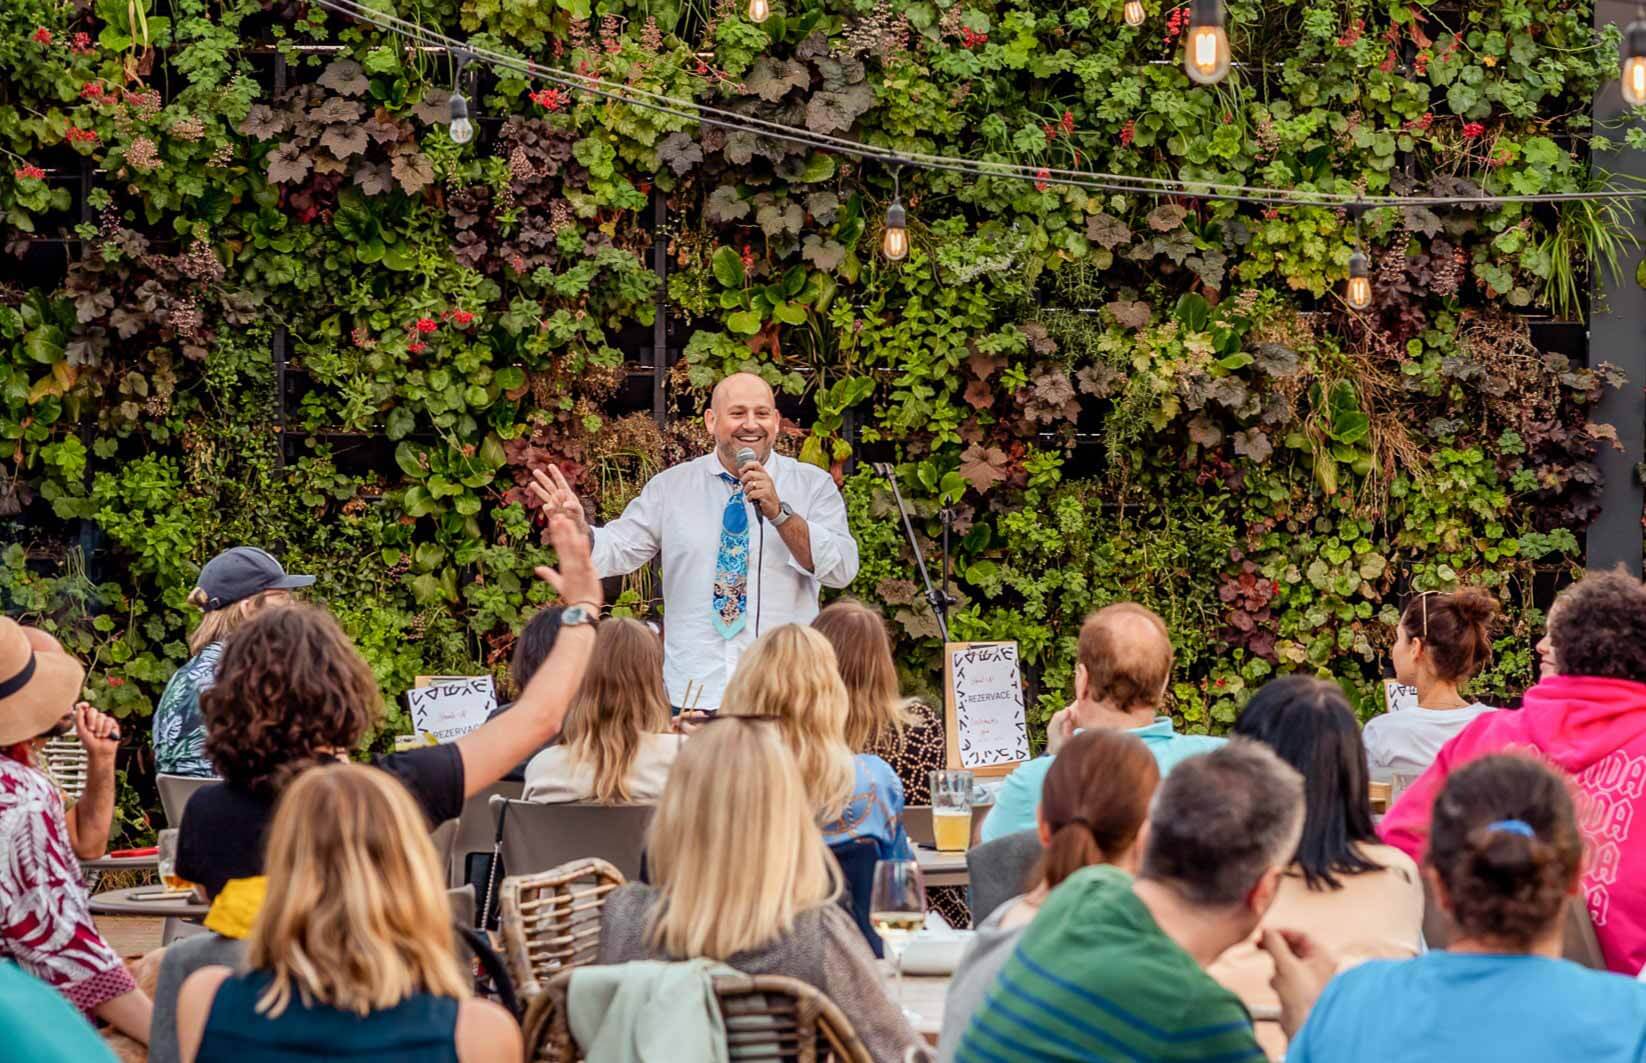 Why is it important to host sustainable events?